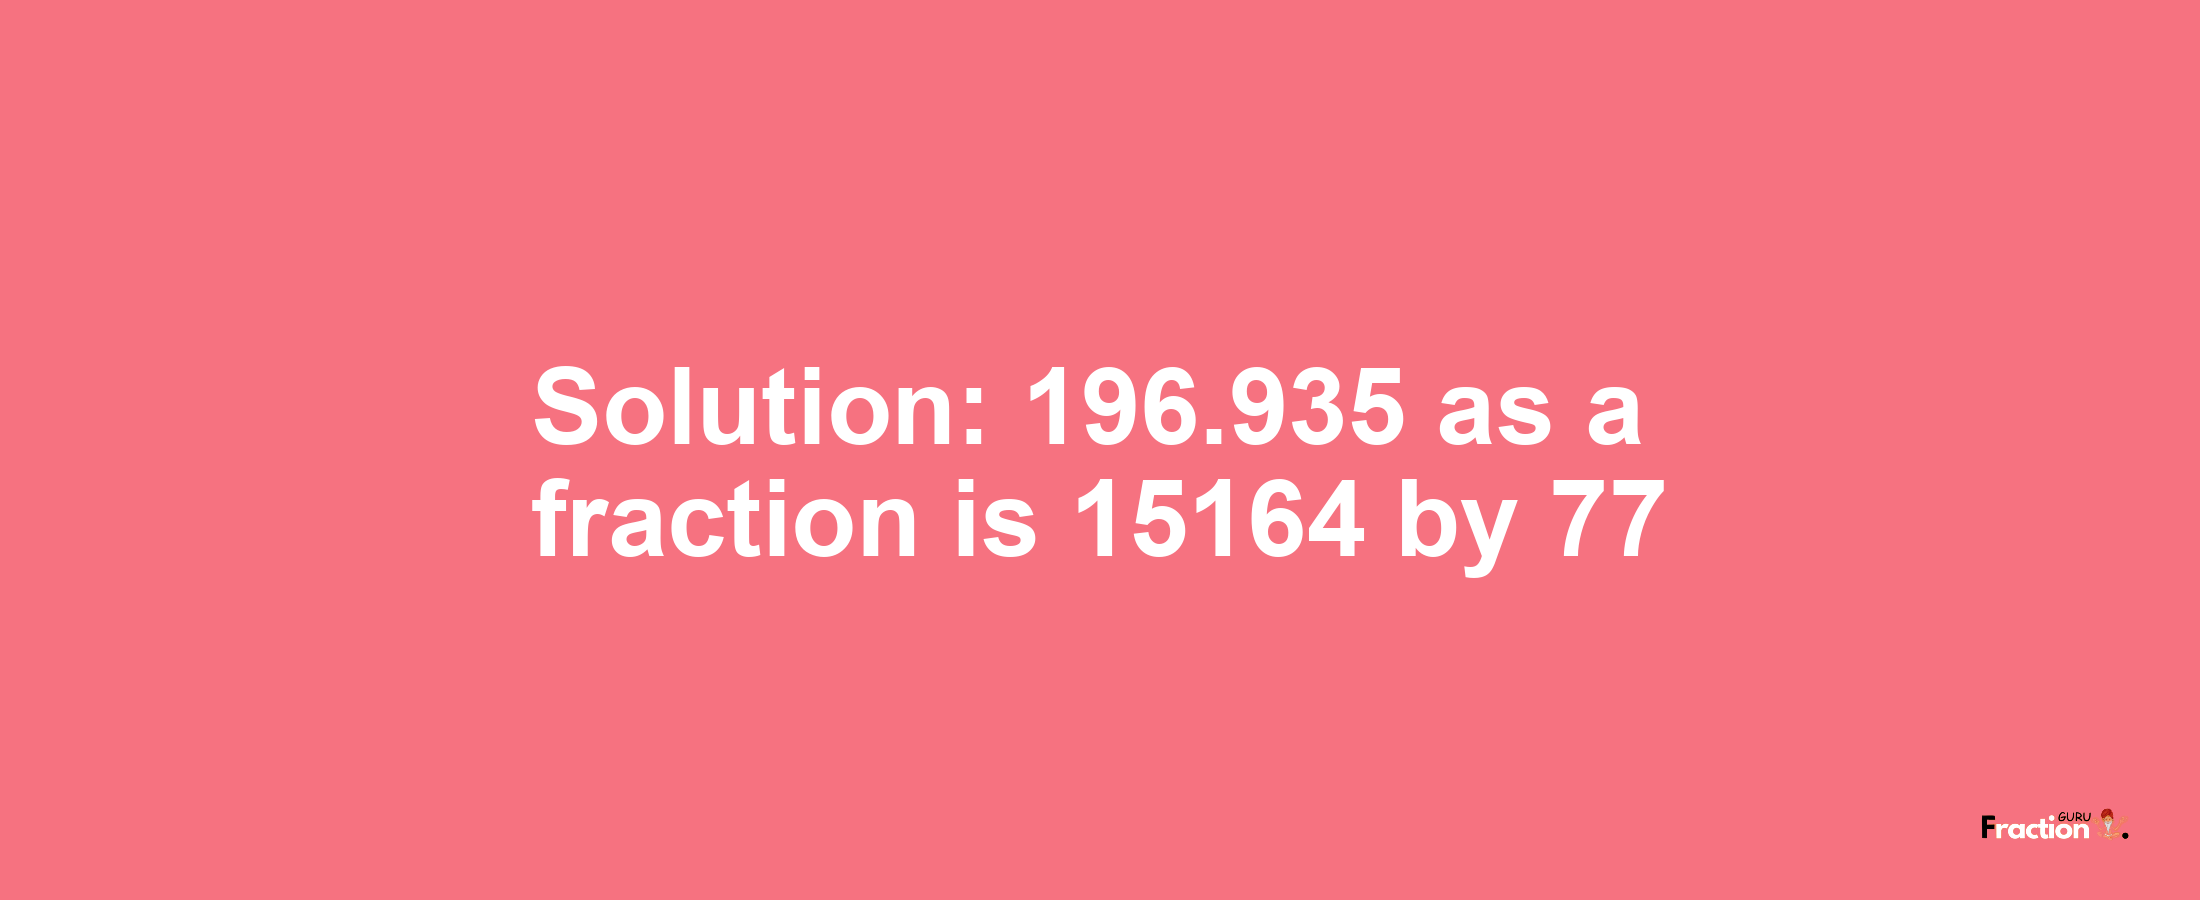 Solution:196.935 as a fraction is 15164/77